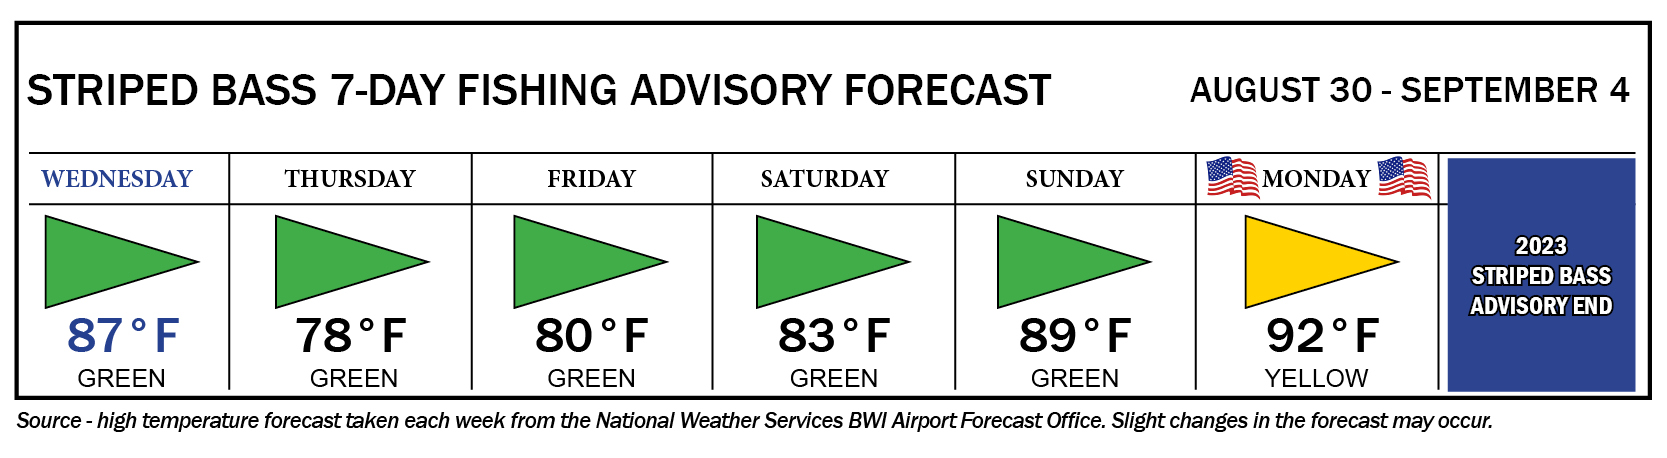 Image of Striped Bass Advisory Forecast showing green flag days Thursday through Tuesday; yellow flag day on Wednesday.